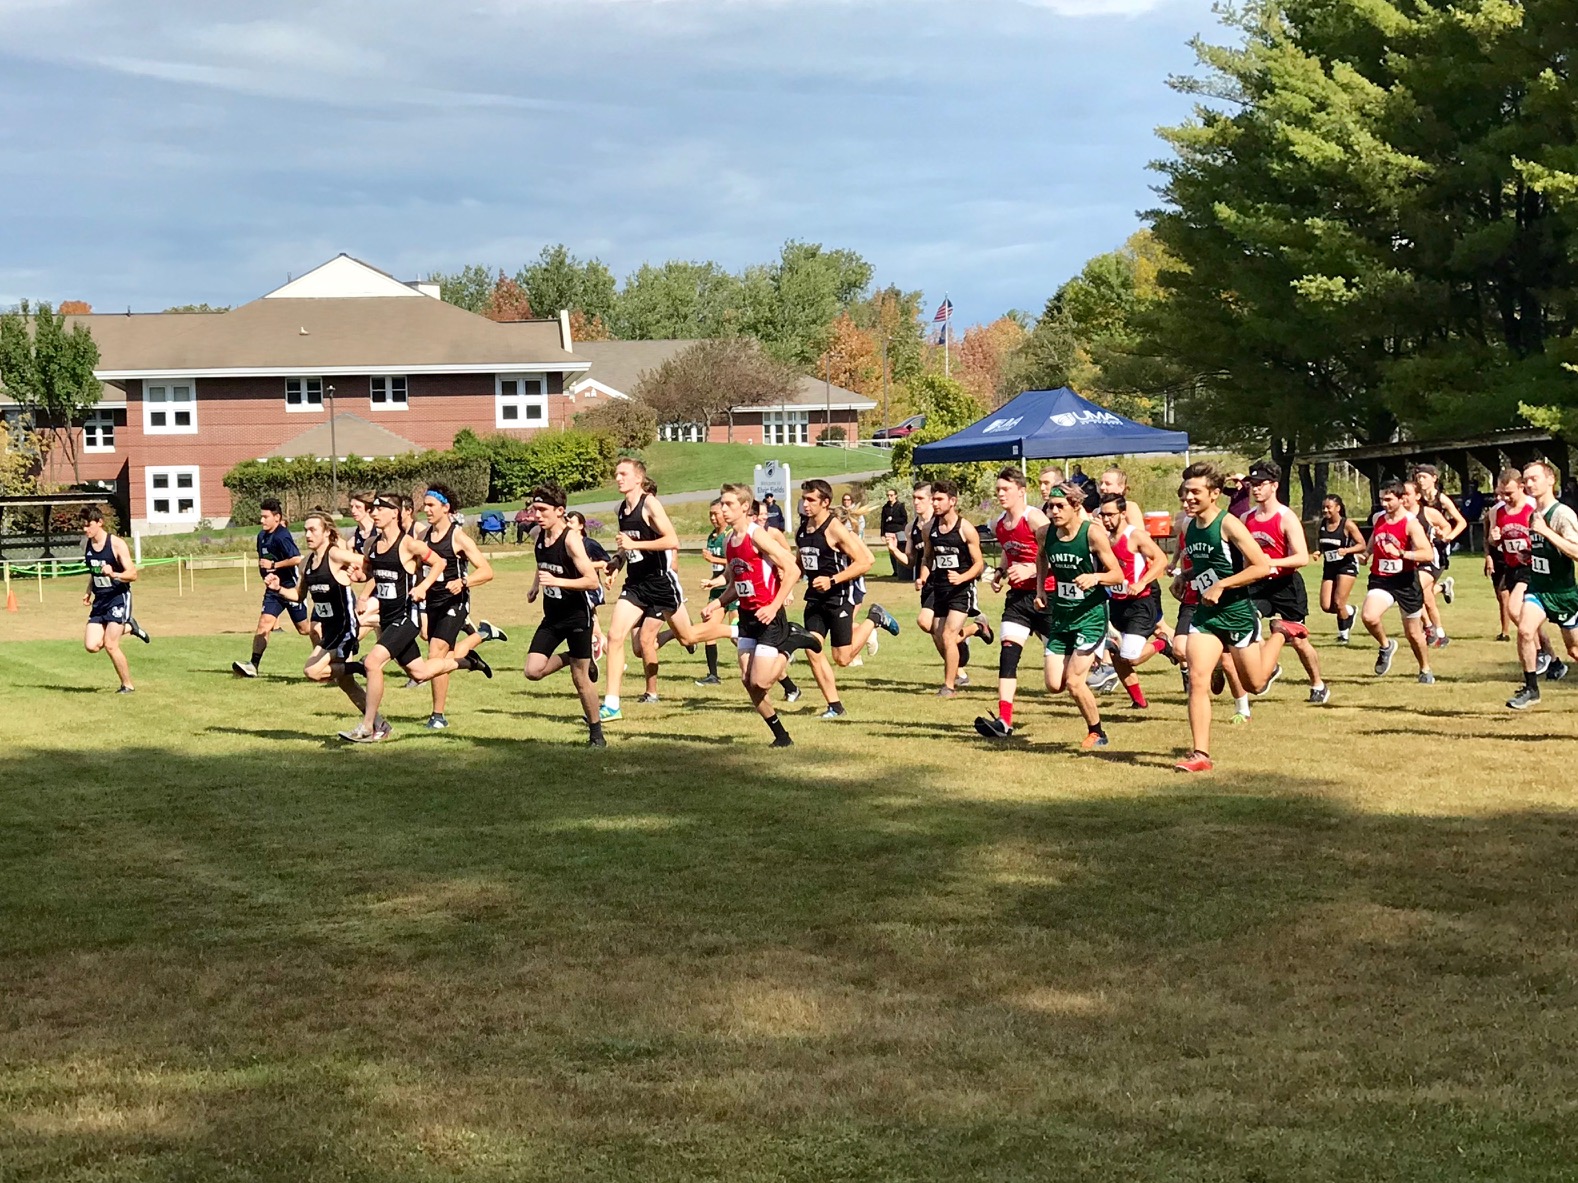 X-Country team takes 2nd place at UMA Cross Country Invitational